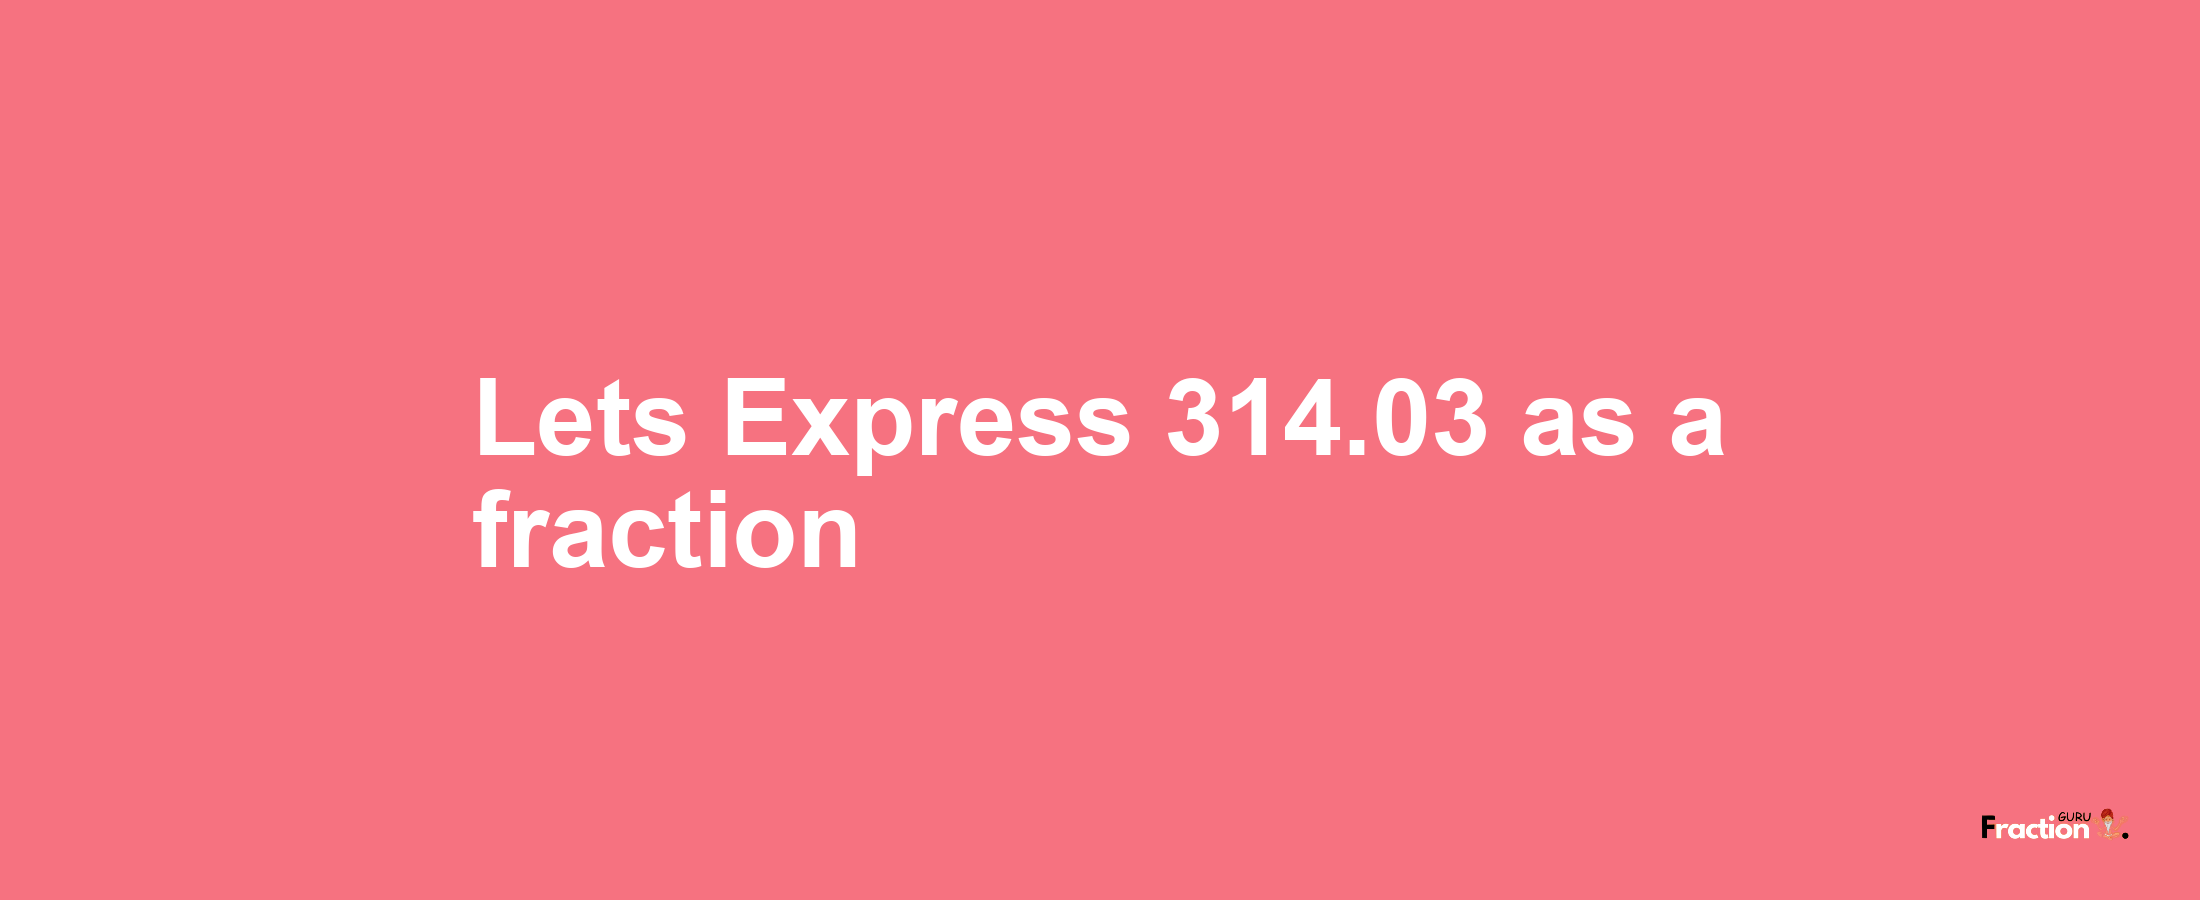 Lets Express 314.03 as afraction